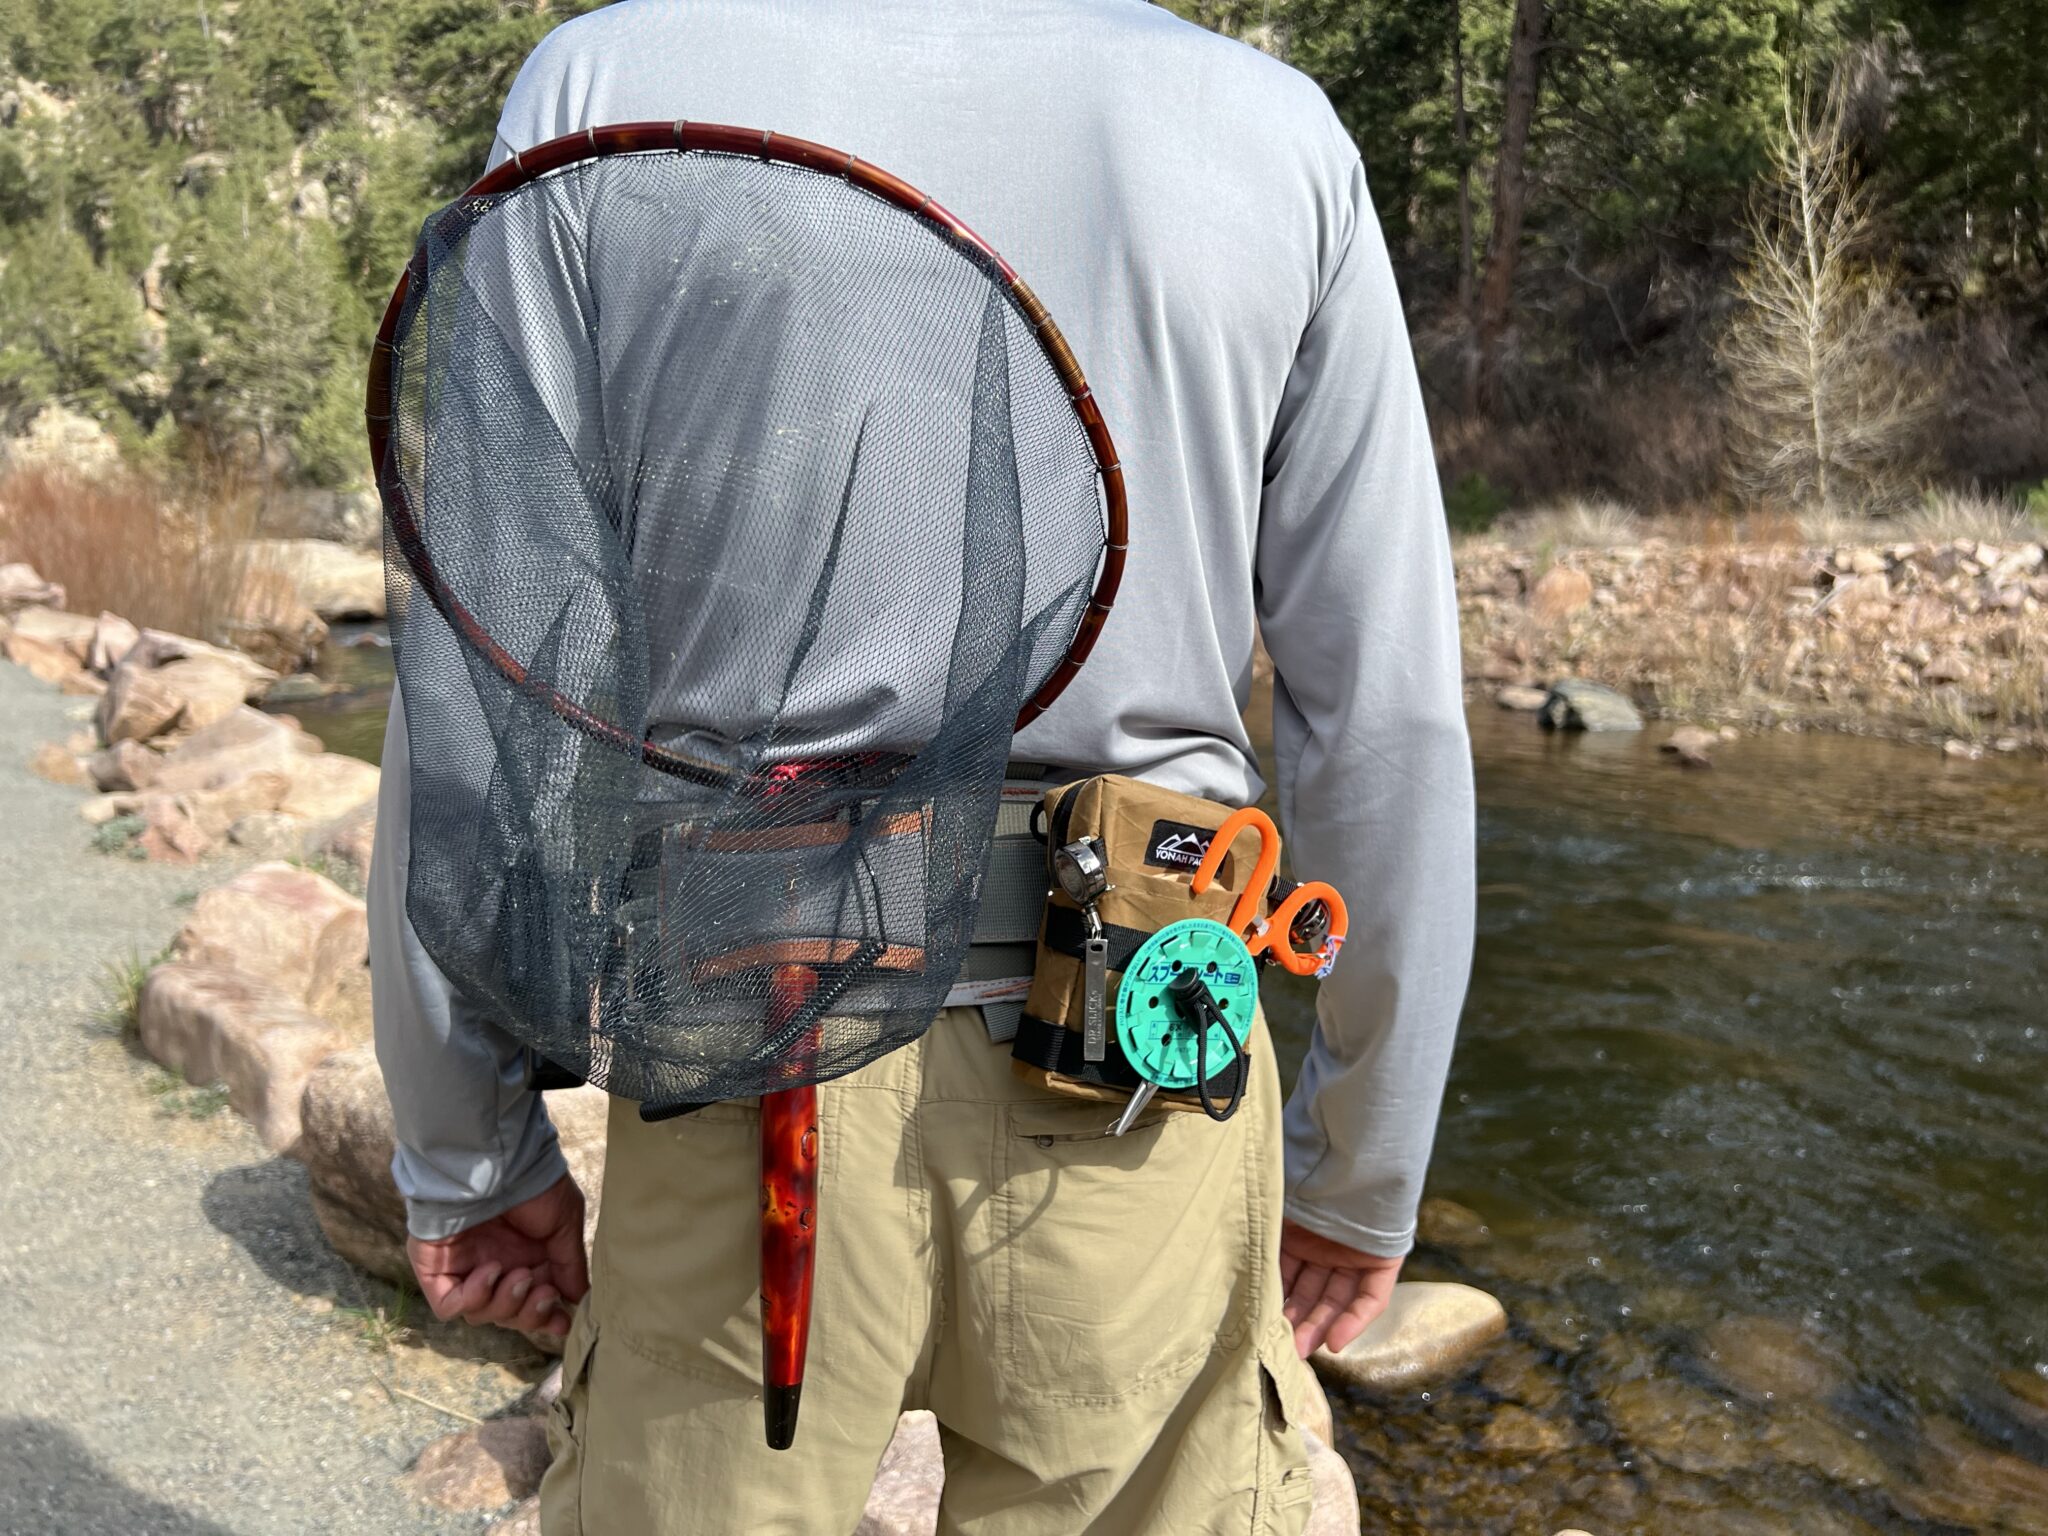  Best Fishing Wading Belt for Waders,Newest Fishing